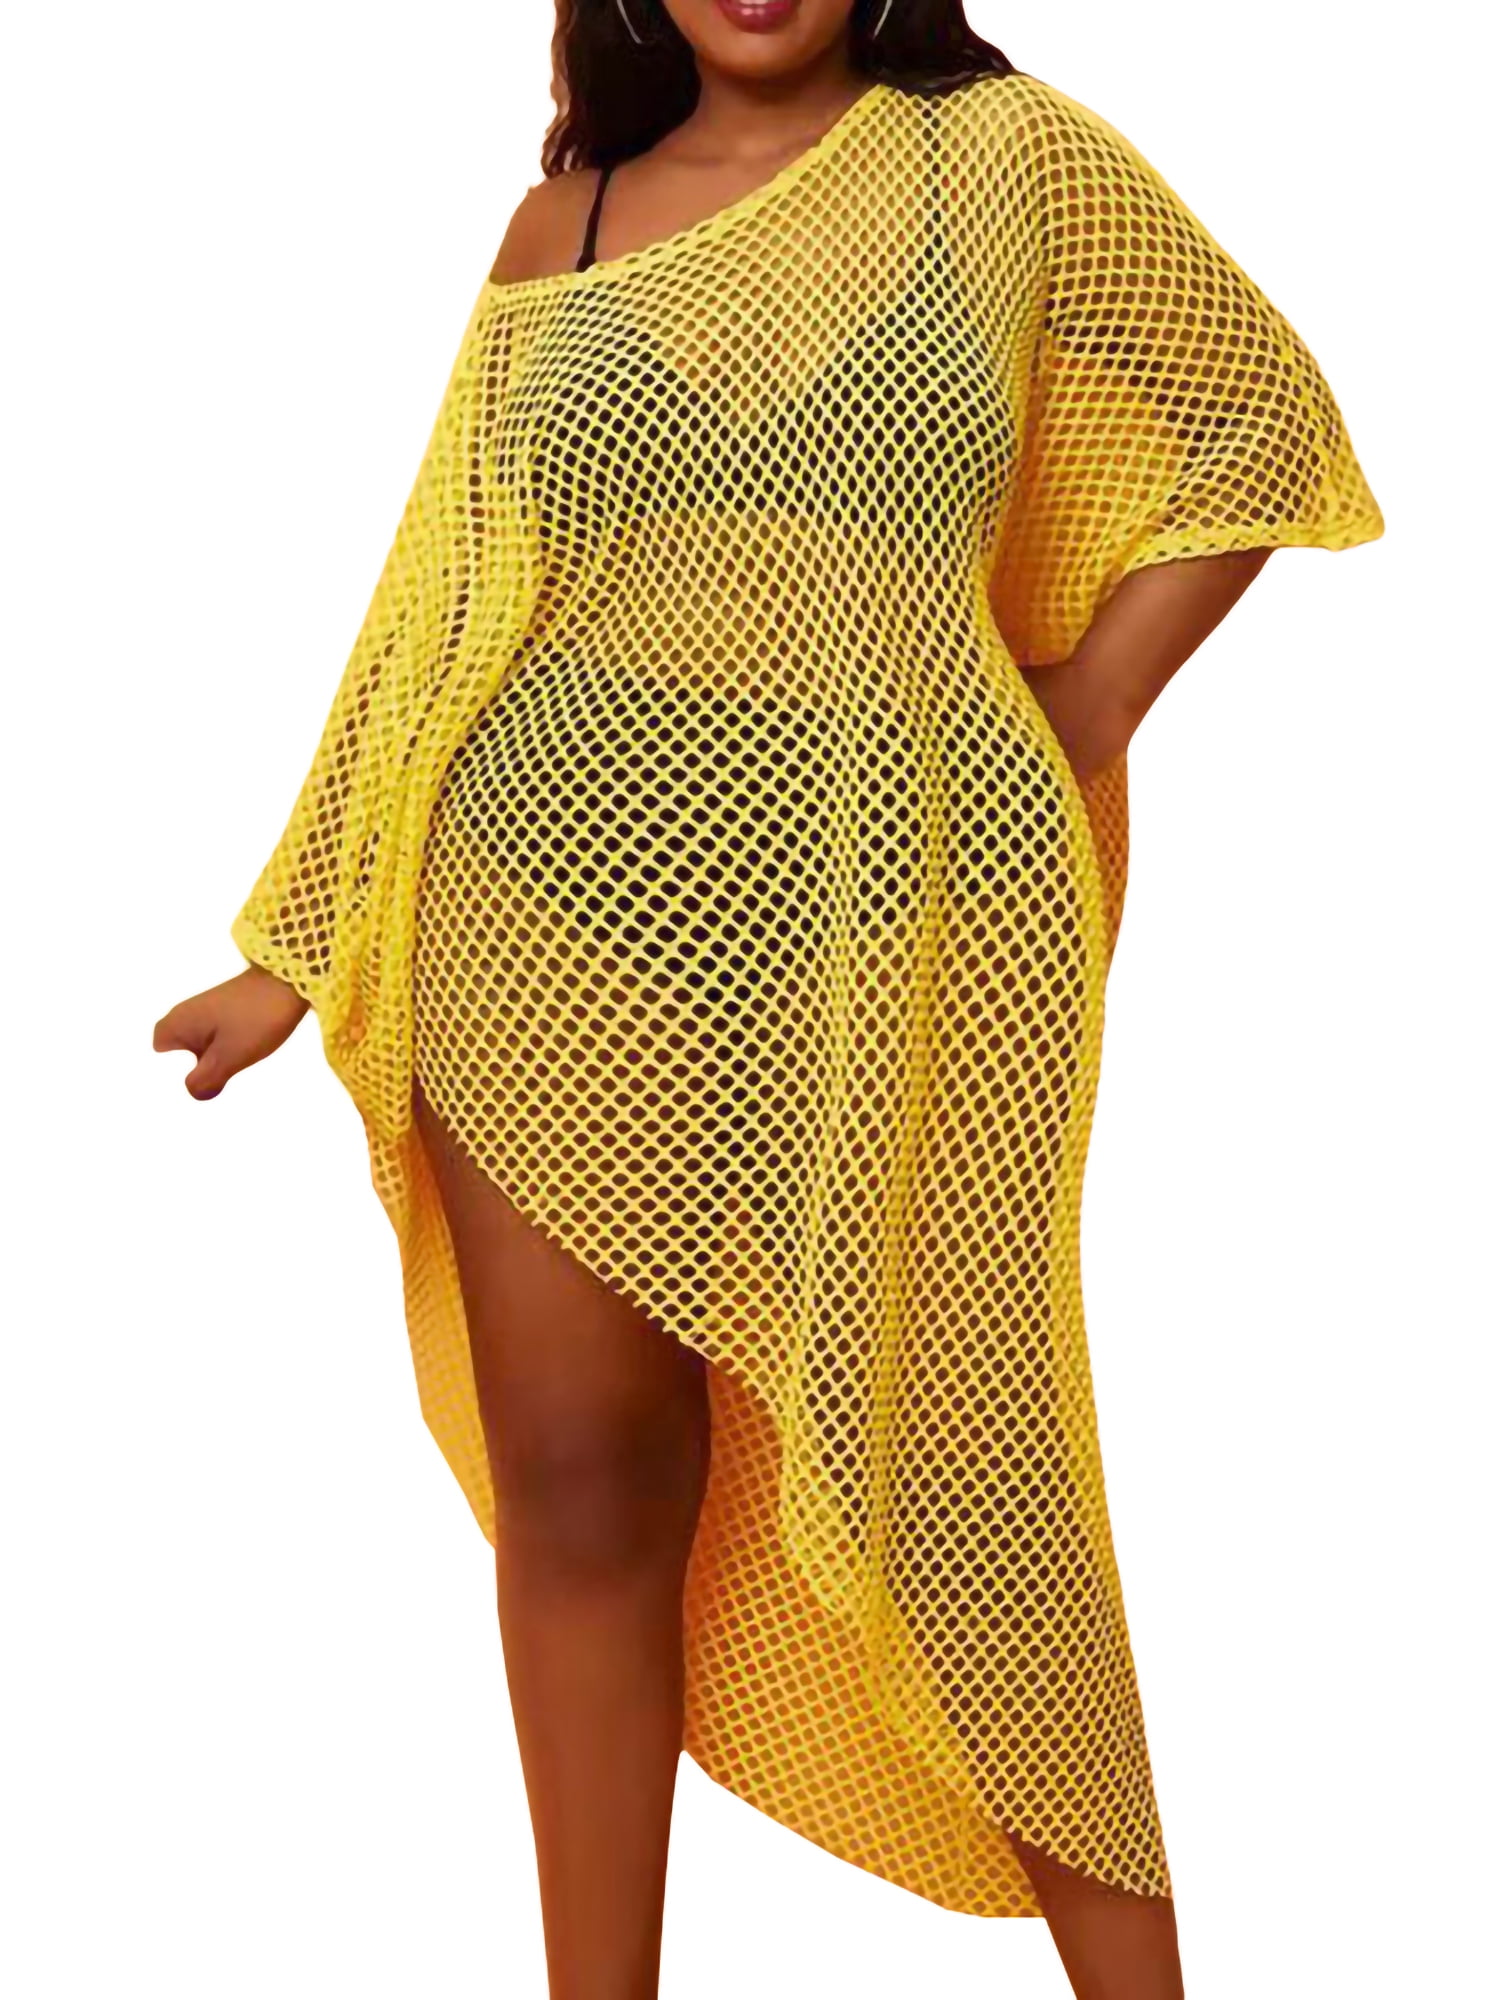 Plus Size Swim Cover Up - Bathing Suit and Swimwear Cover Ups